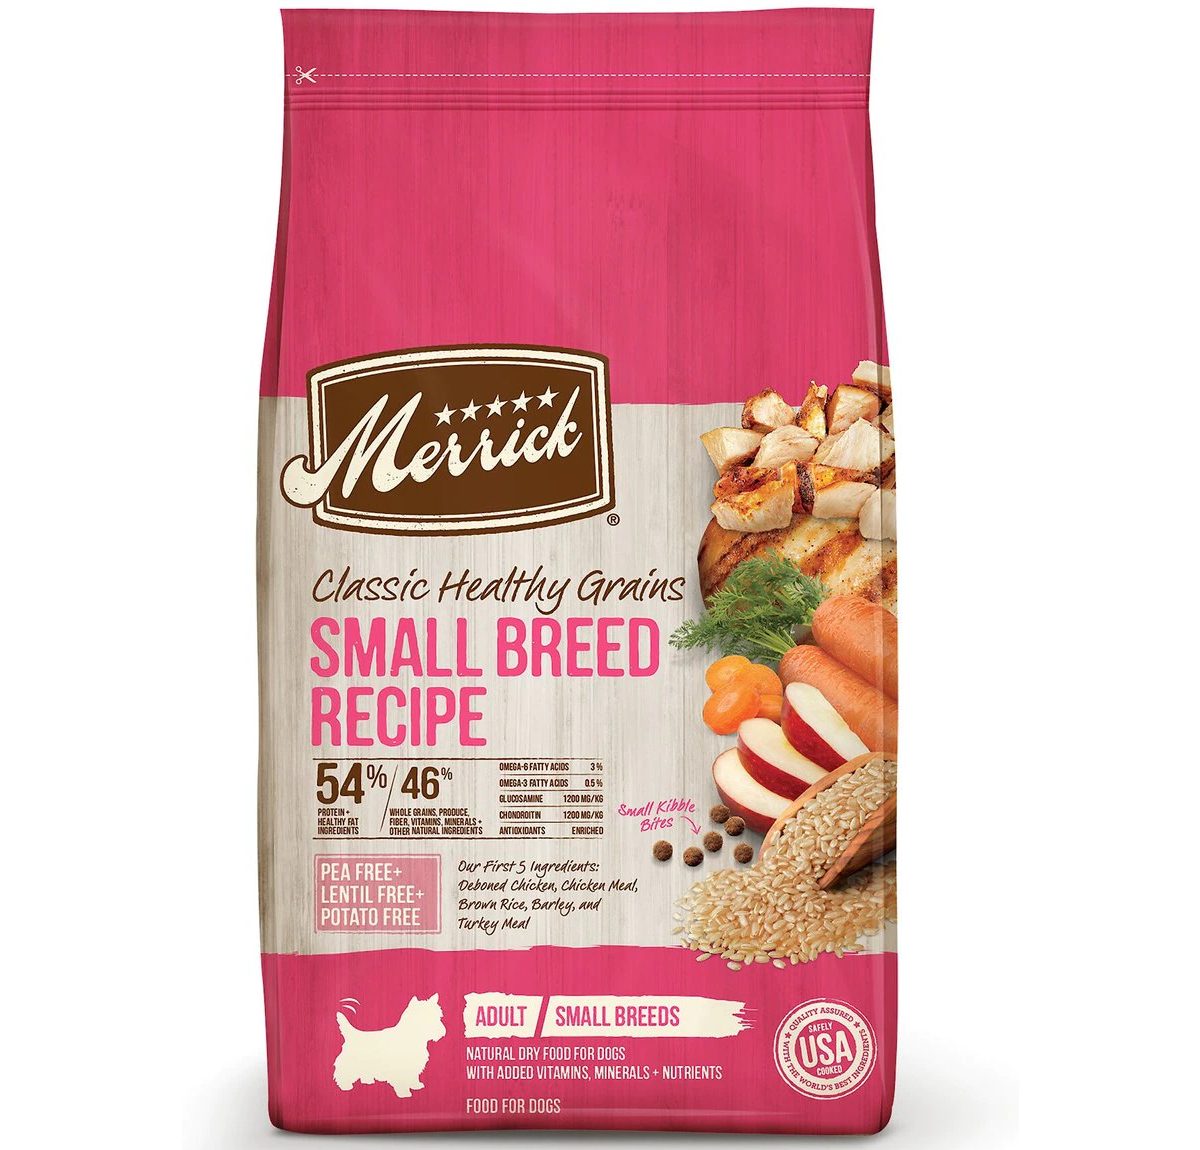 New Project Merrick Classic Healthy Grains Small Breed Recipe Adult Dry Dog Food